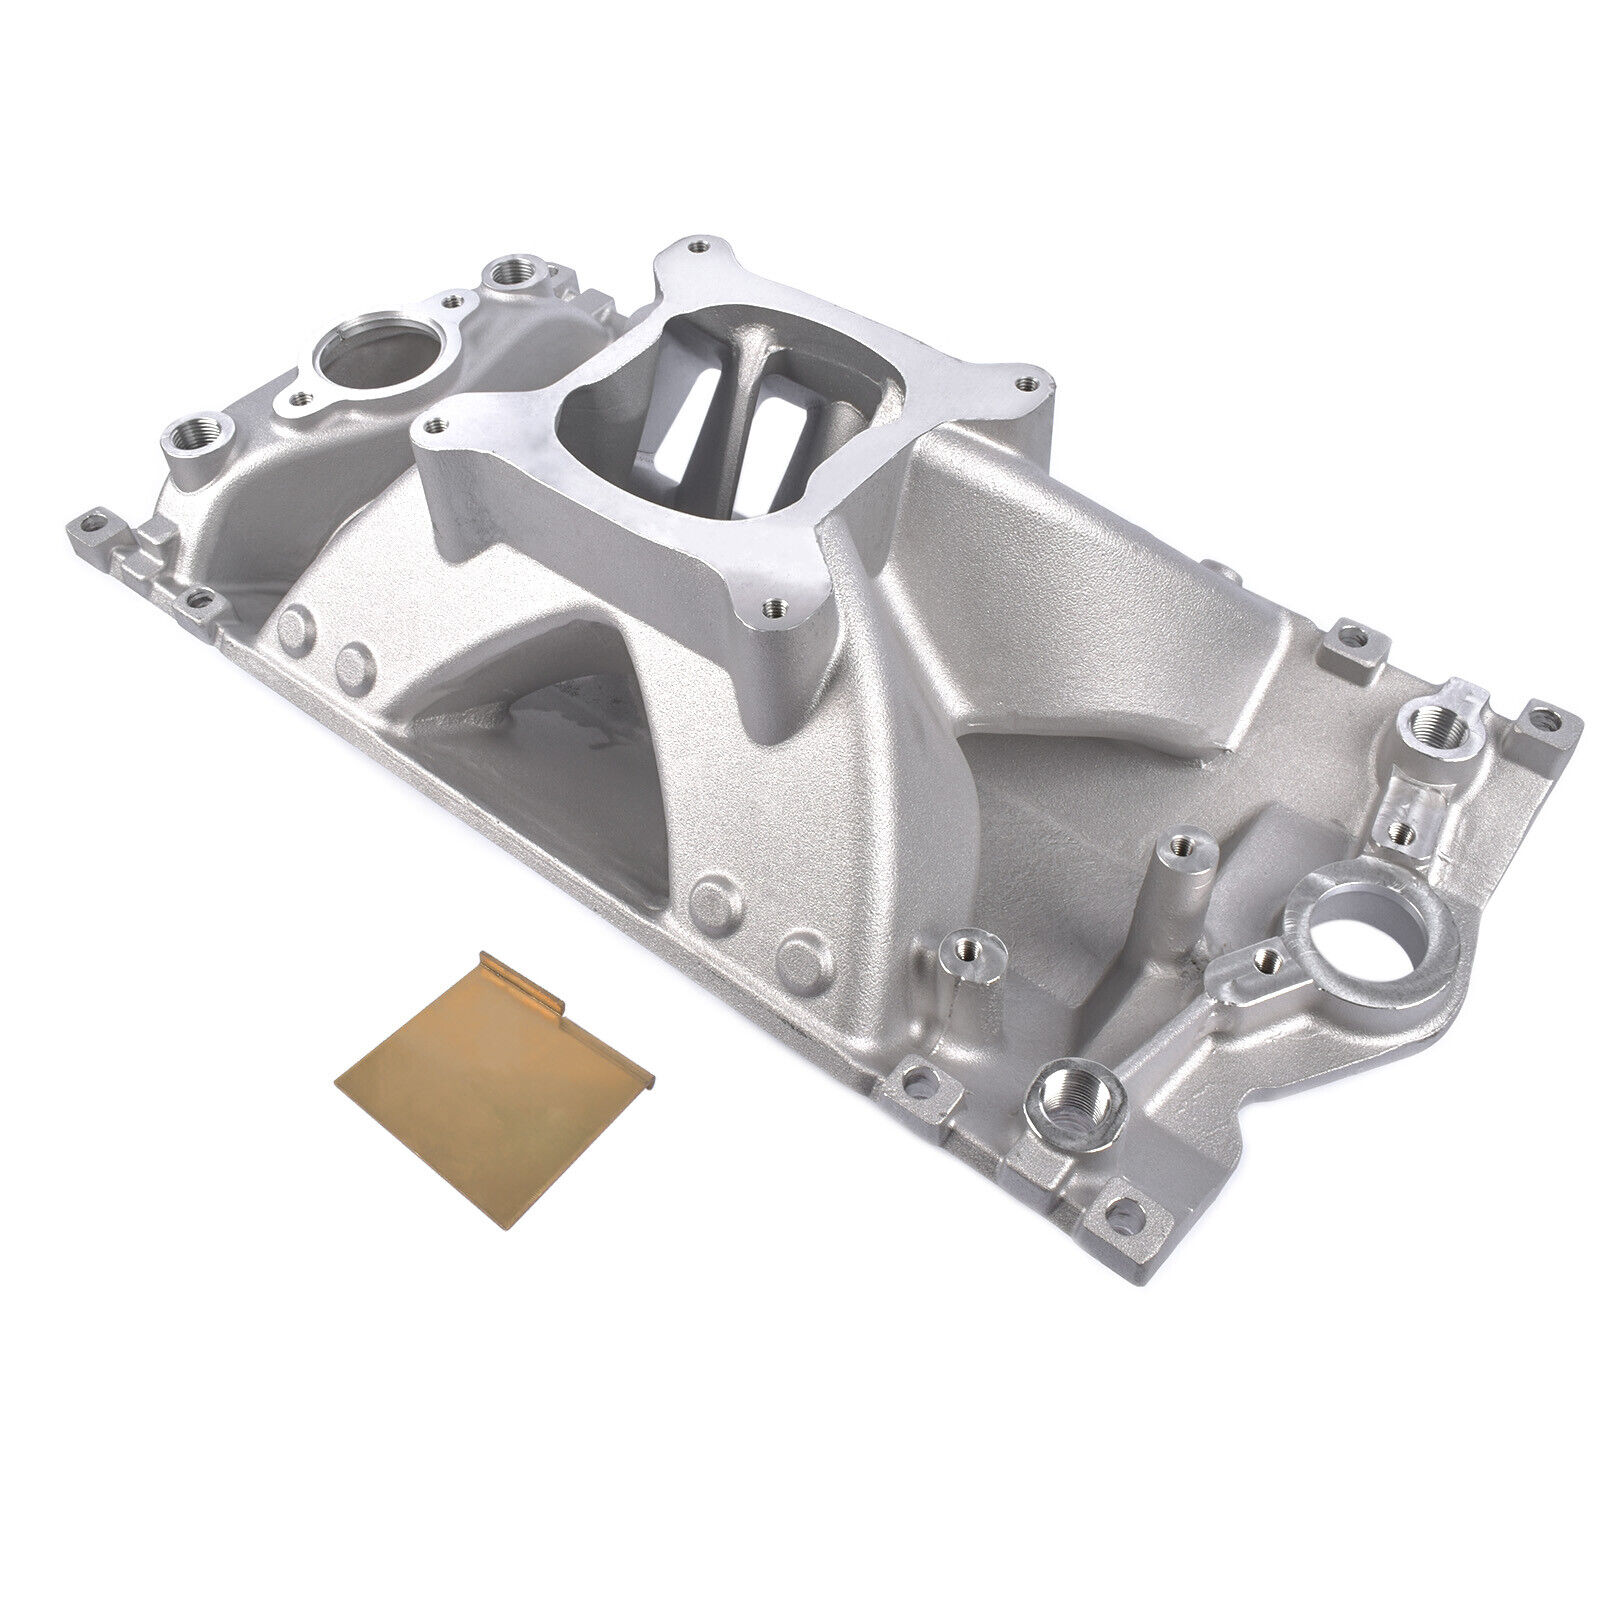 High Rise Single Plane Small Block Intake Manifold for Chevy SBC 350 3000-7500+